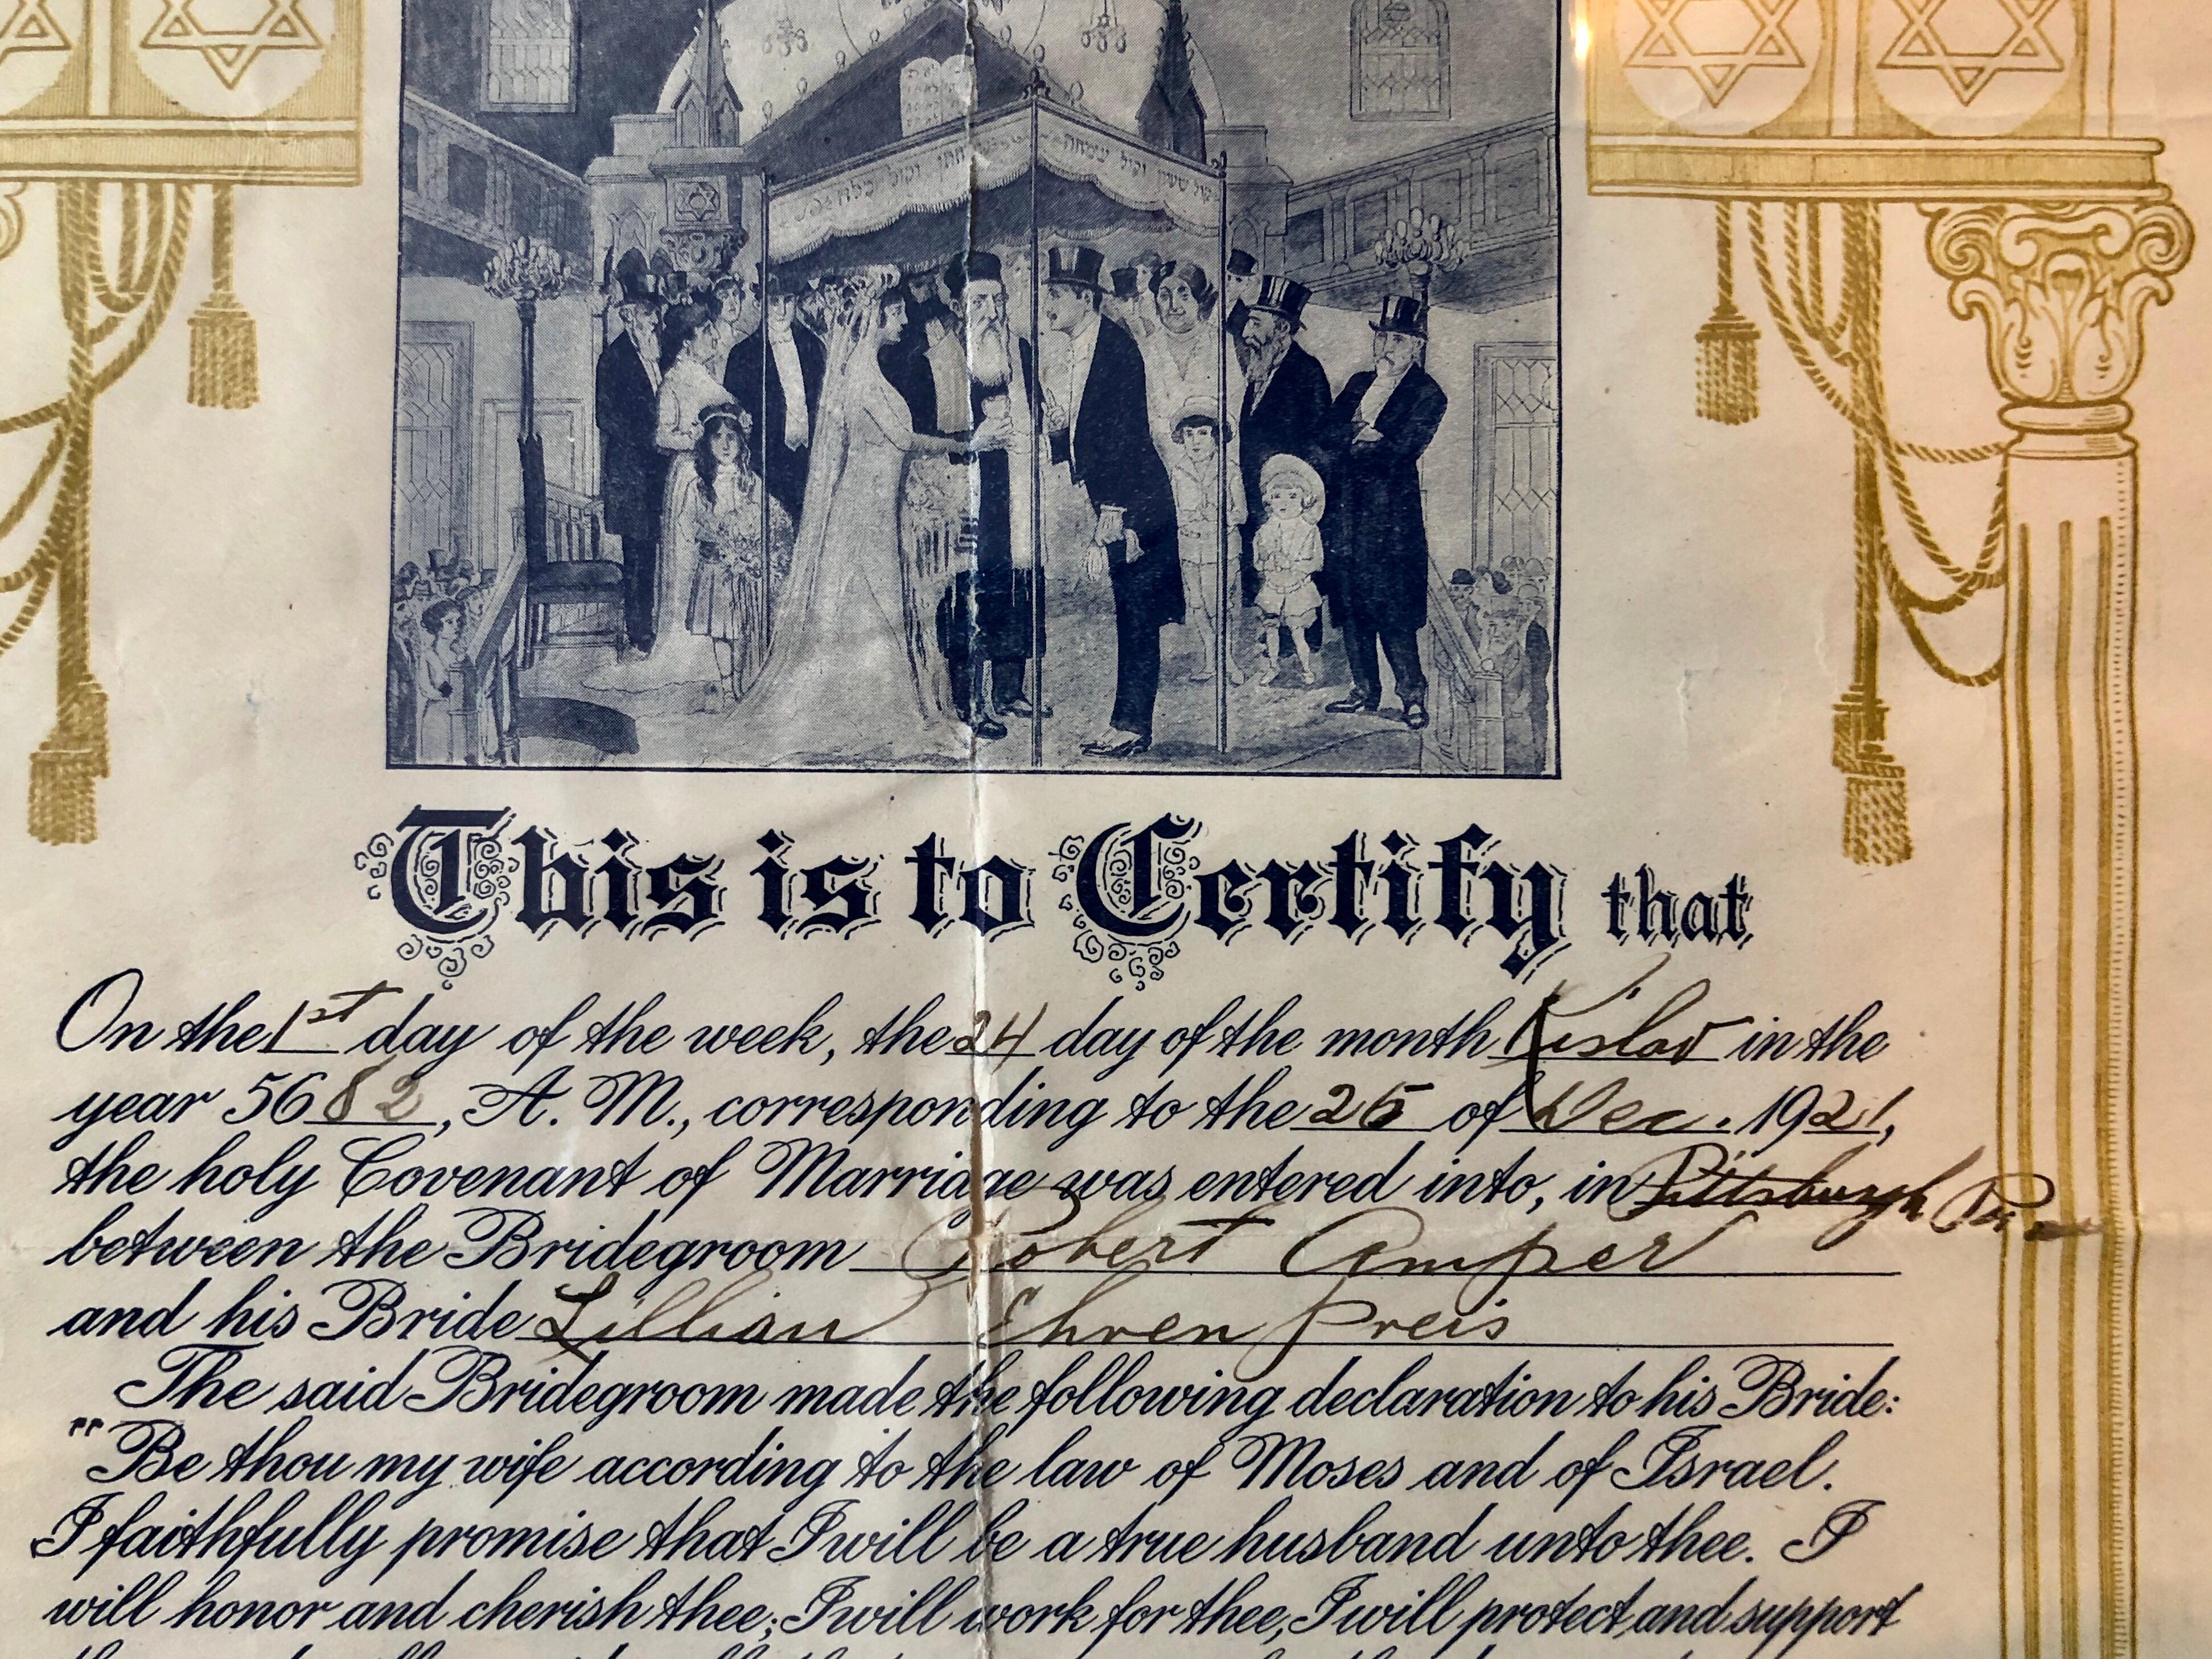 Vintage Jewish marriage contract, Most likely printed in the USA or Germany. Used in Pittsburgh, Pennsylvania, hand dated 1921. A rare early American judaic piece. Printed in gold and blue
written out in a beautiful Hebrew calligraphy and English.